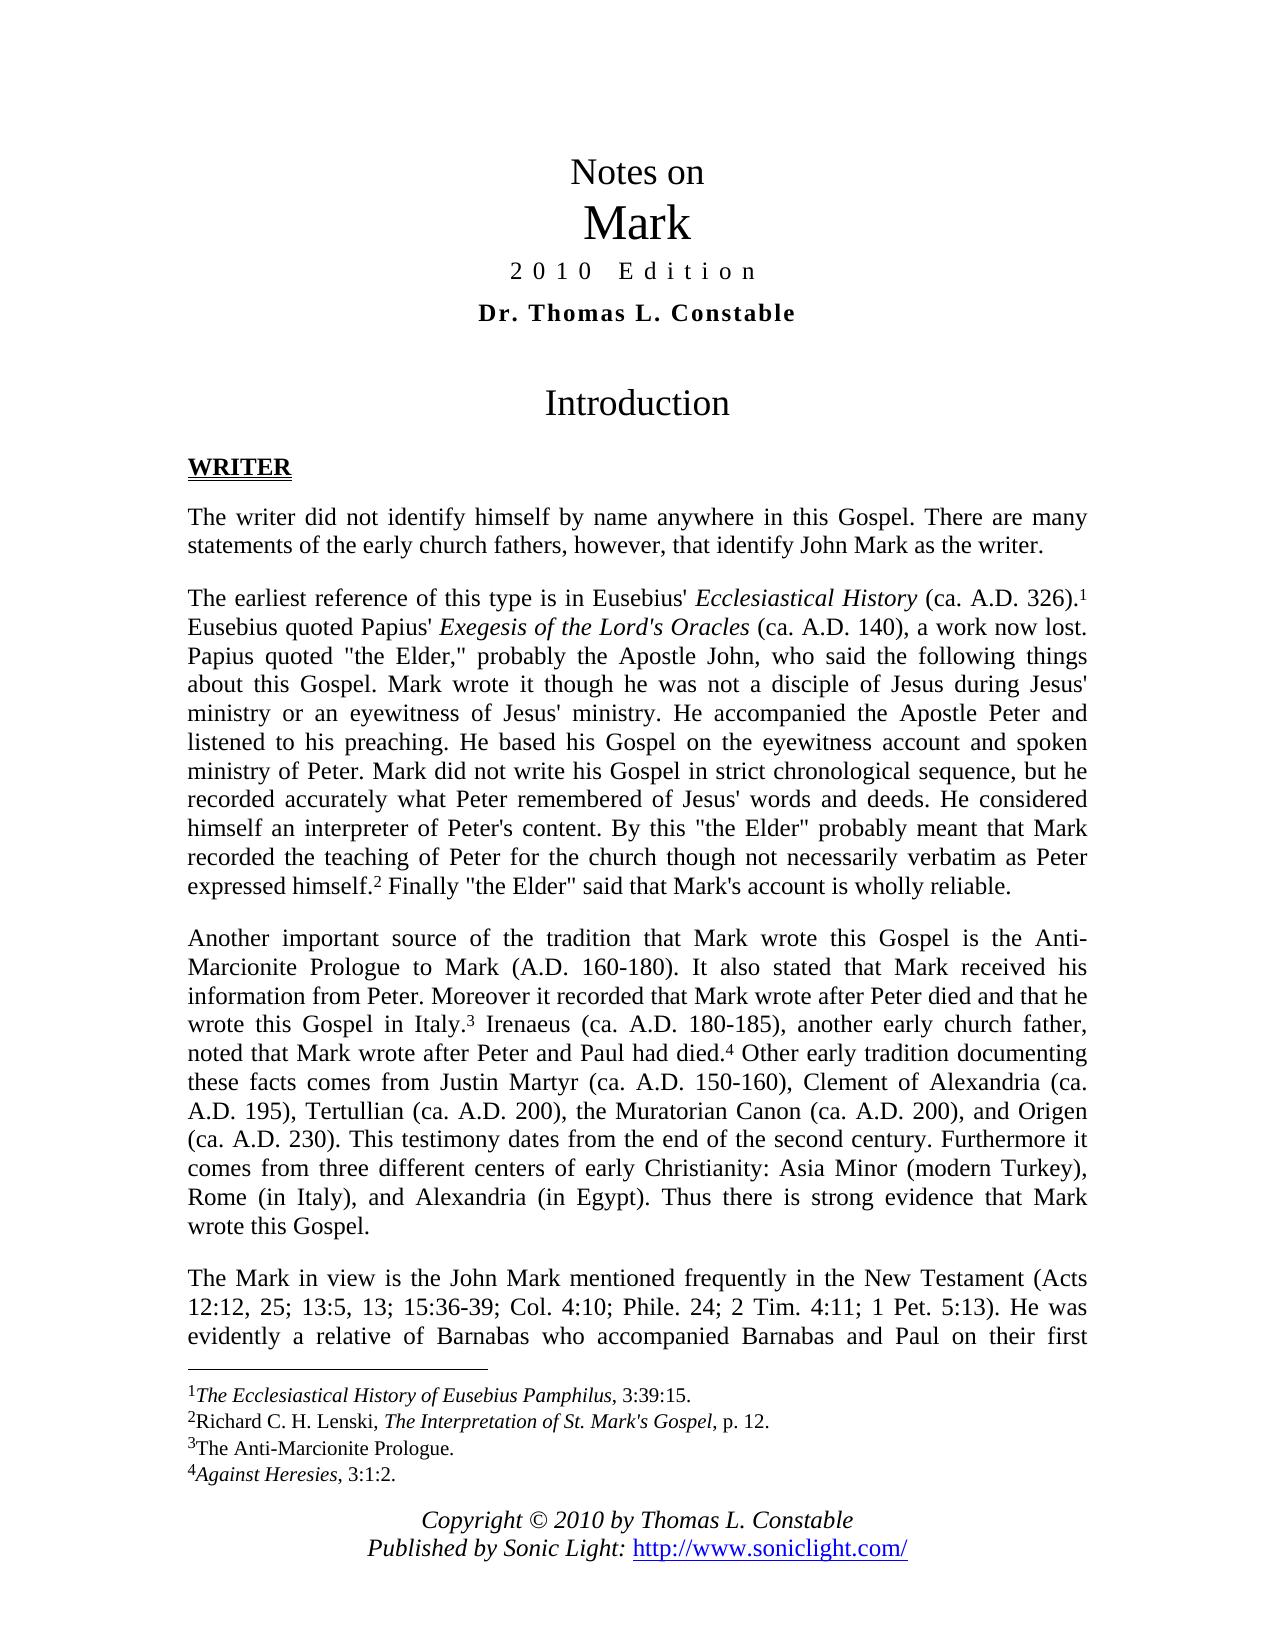 Mark by Dr. Thomas L. Constable